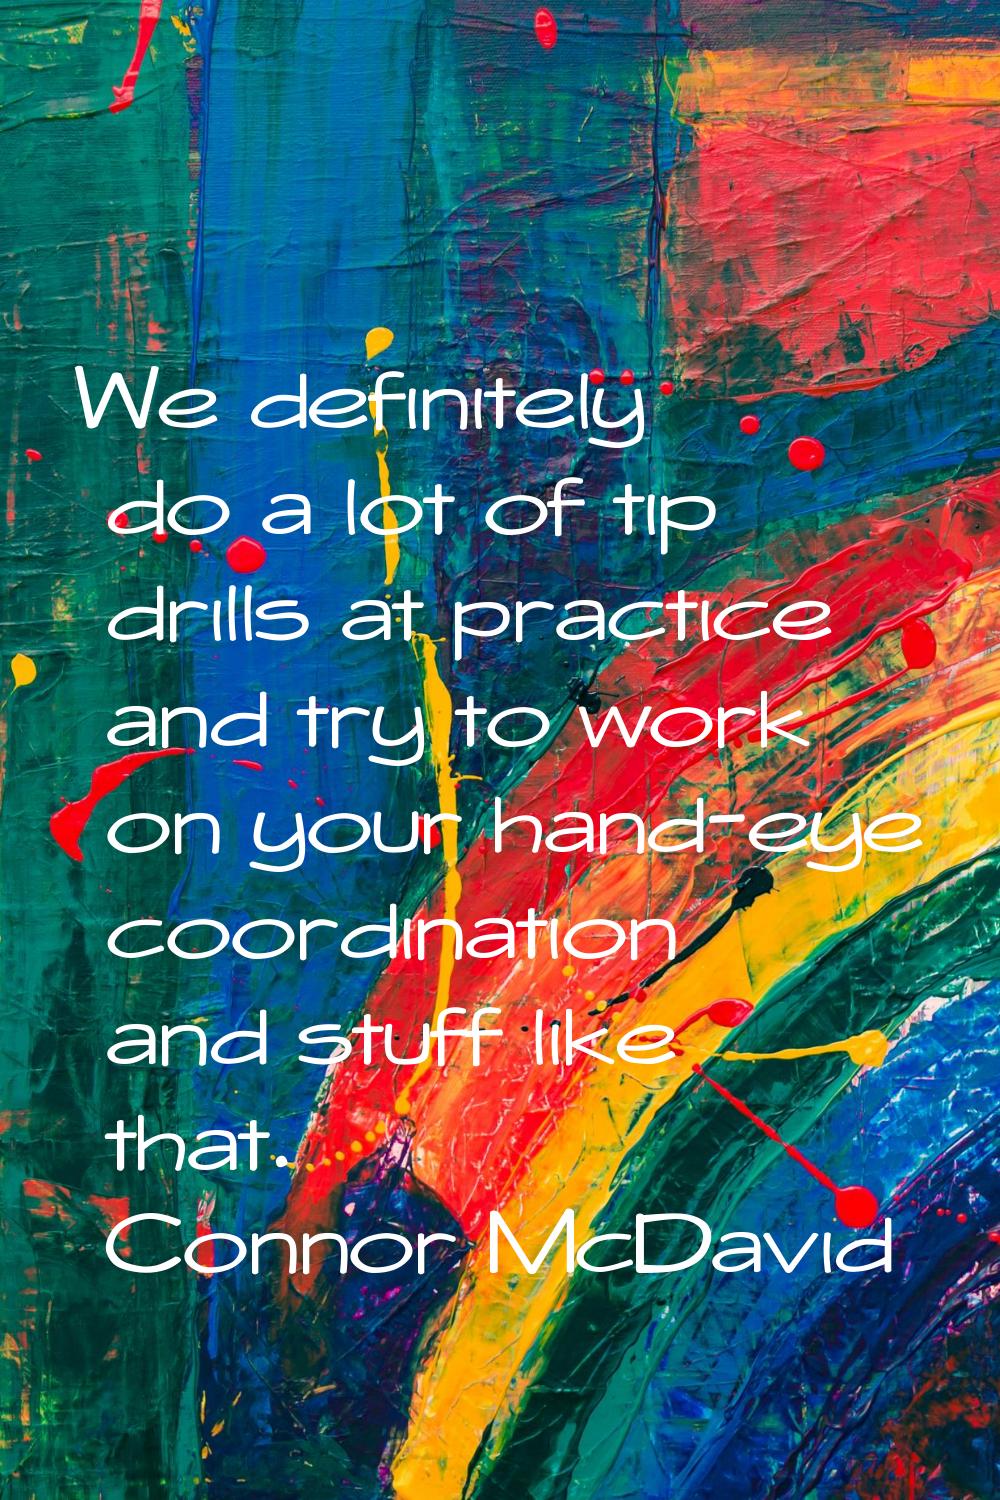 We definitely do a lot of tip drills at practice and try to work on your hand-eye coordination and 